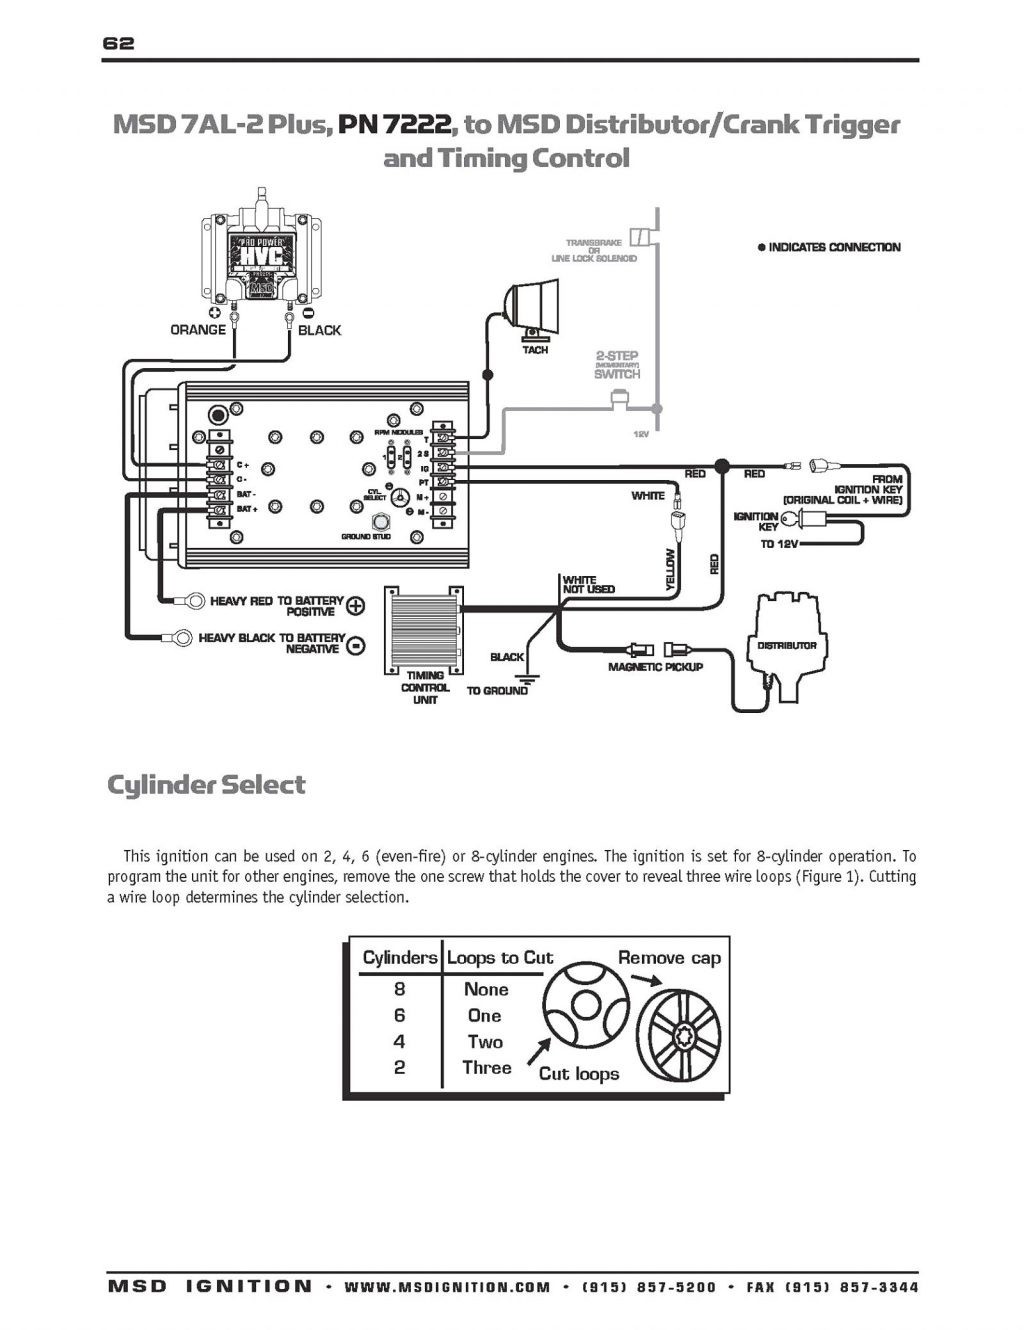 Wiring Diagram Astonishing Grove Manlift Upright Within Msd 7al 2